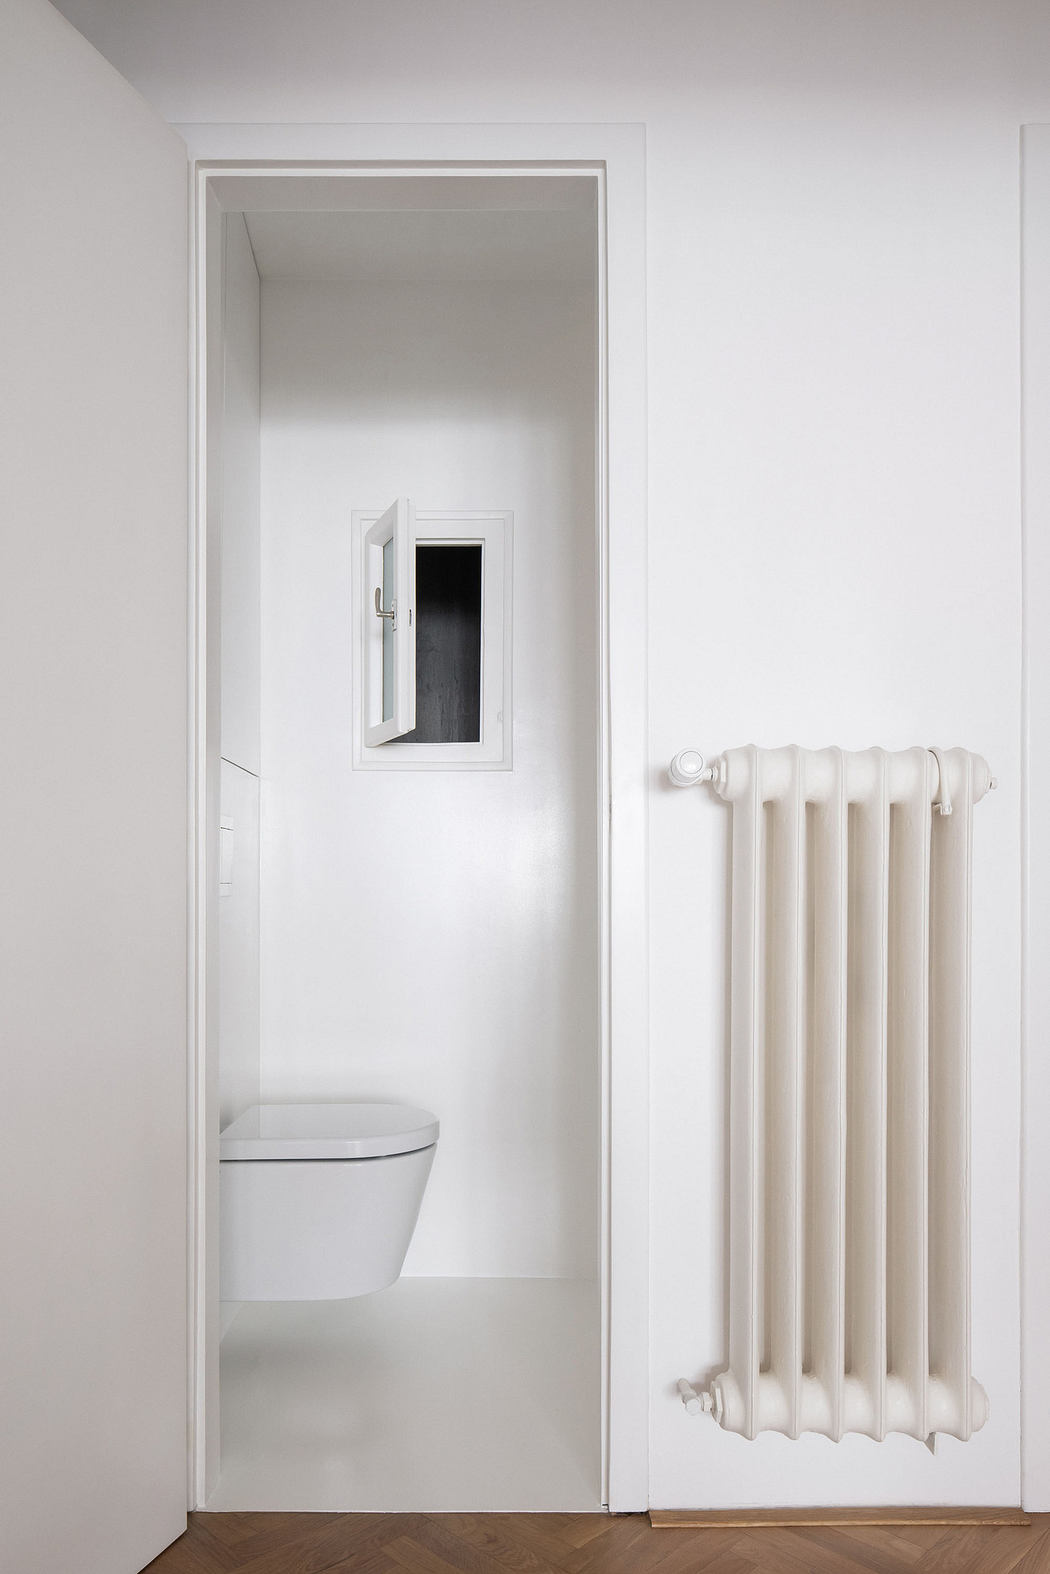 Modern bathroom entrance with a small window and a white radiator.